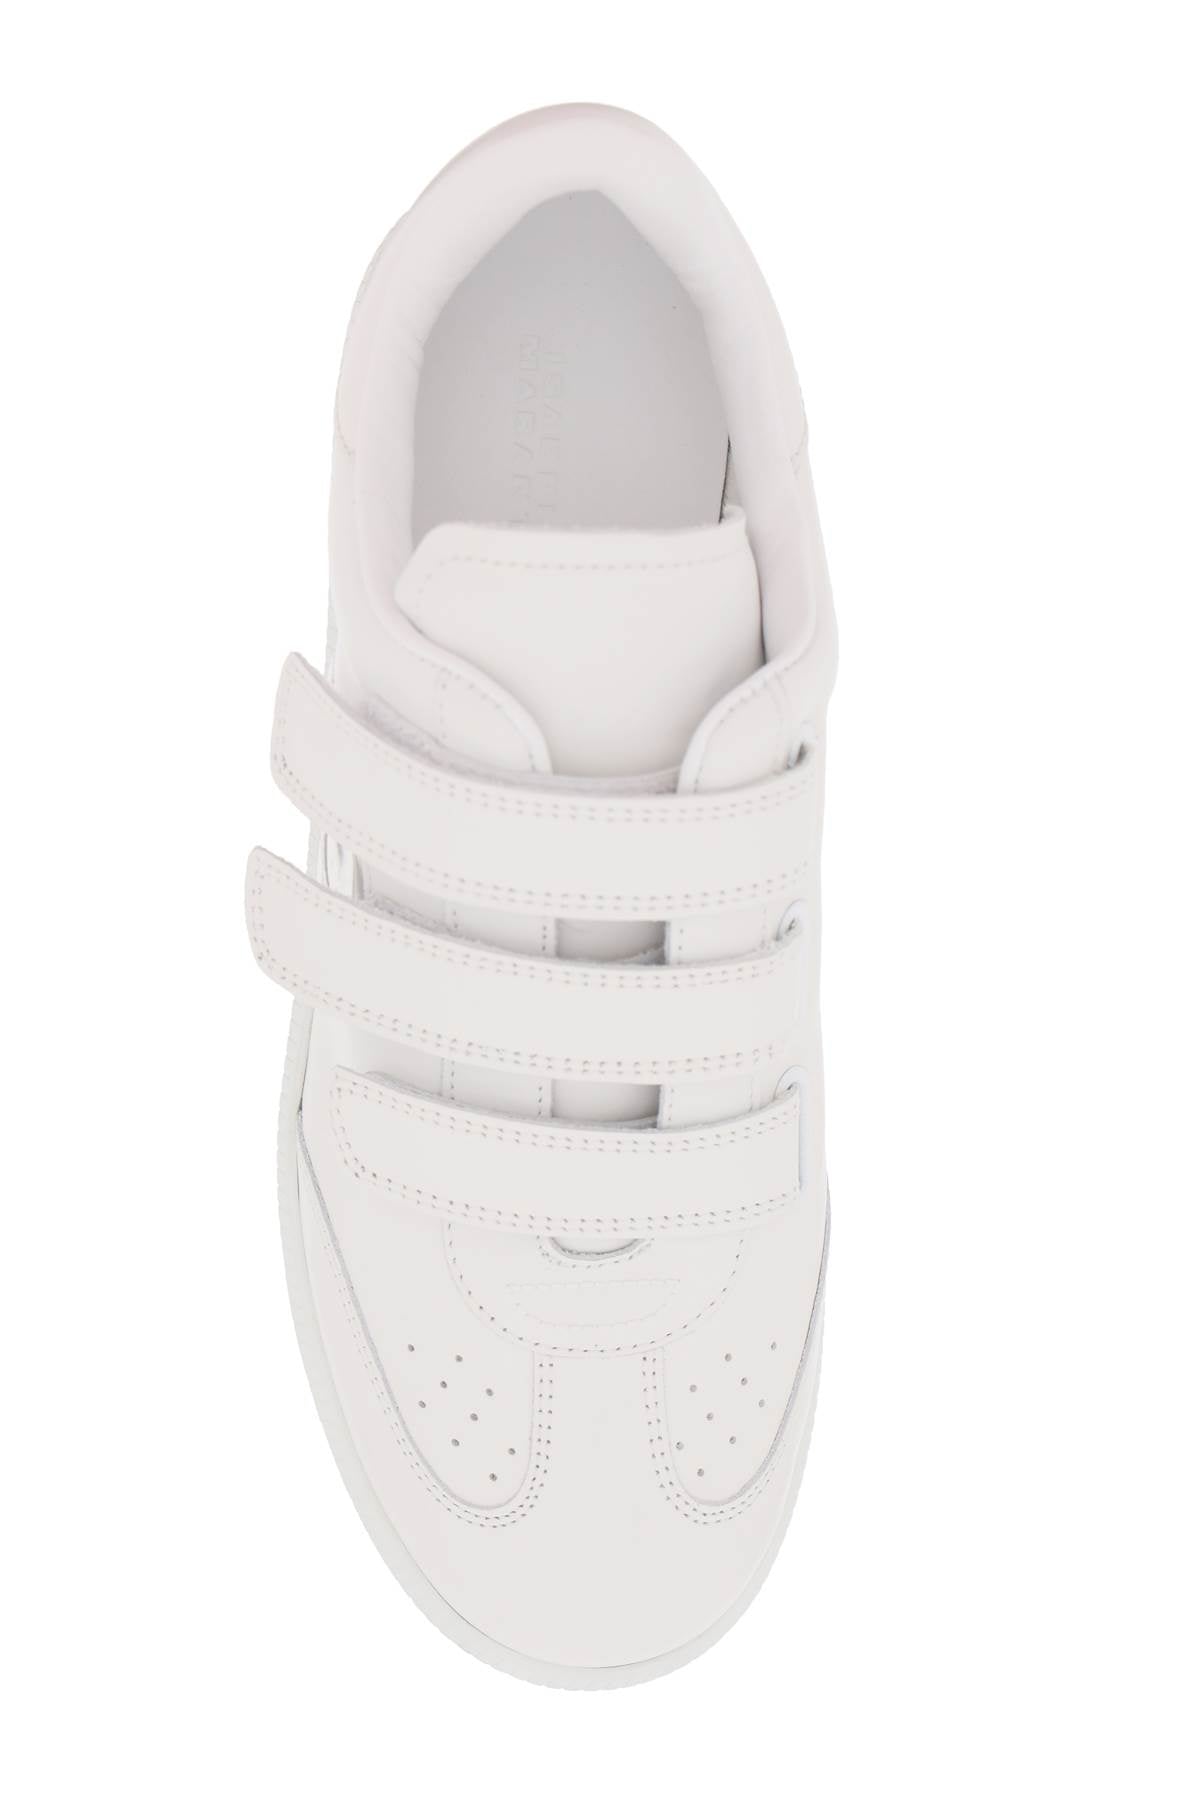 Isabel marant etoile beth leather sneakers-1